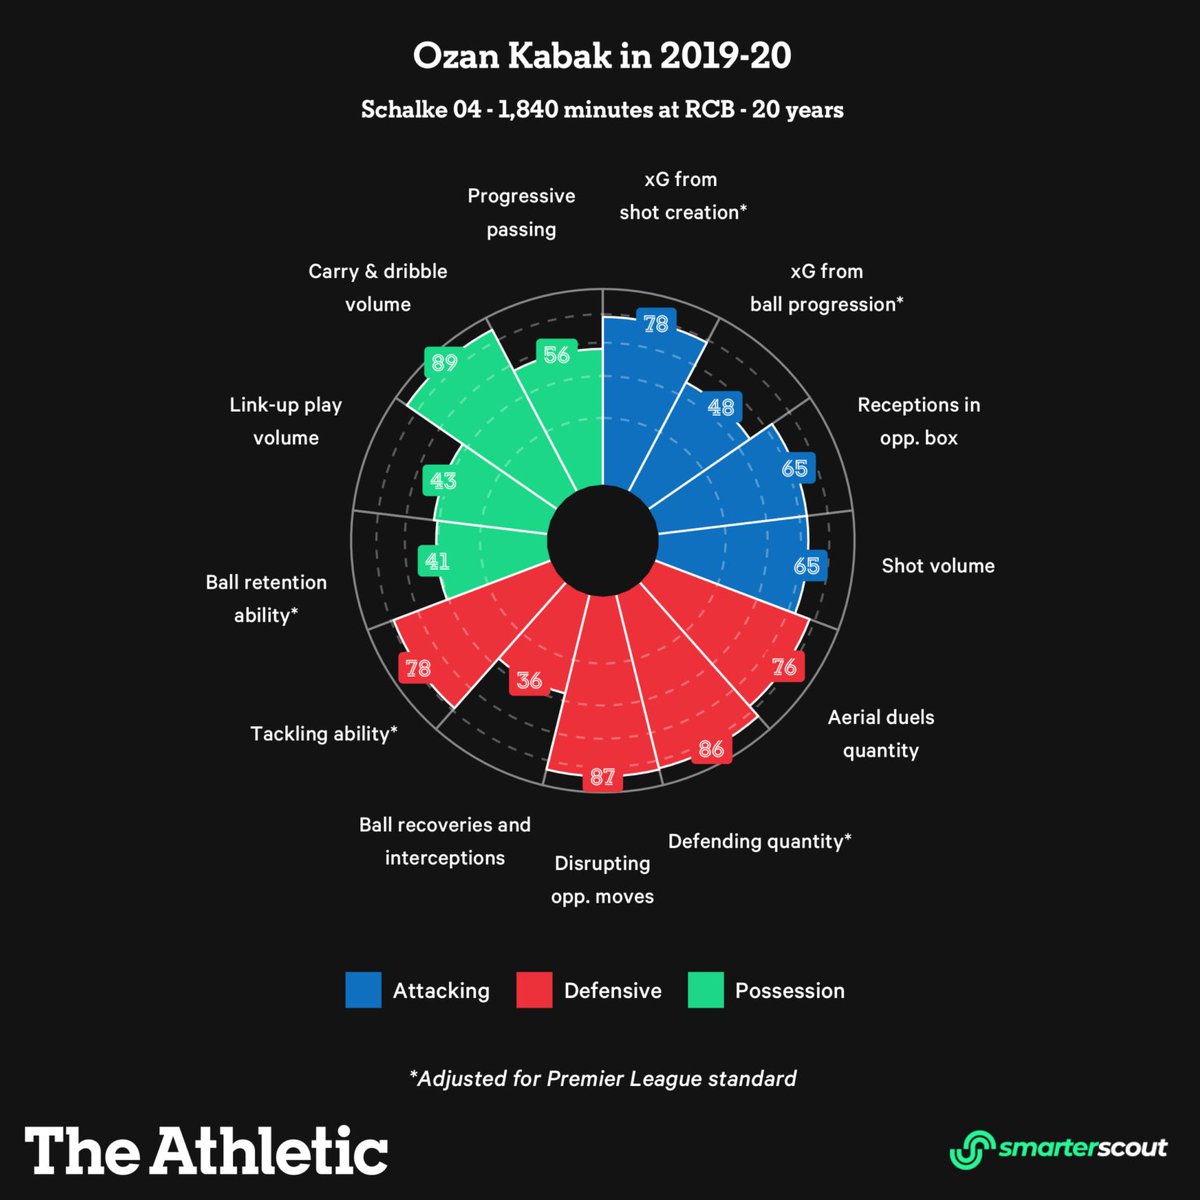 [The Athletic] Kabak is an aggressive defender, often stepping out from the back to challenge for the ball. He’s extremely comfortable in carrying the ball, but isn’t always the safest in possession. Neither of these are huge blemishes given he is yet to turn 21. (3/4)